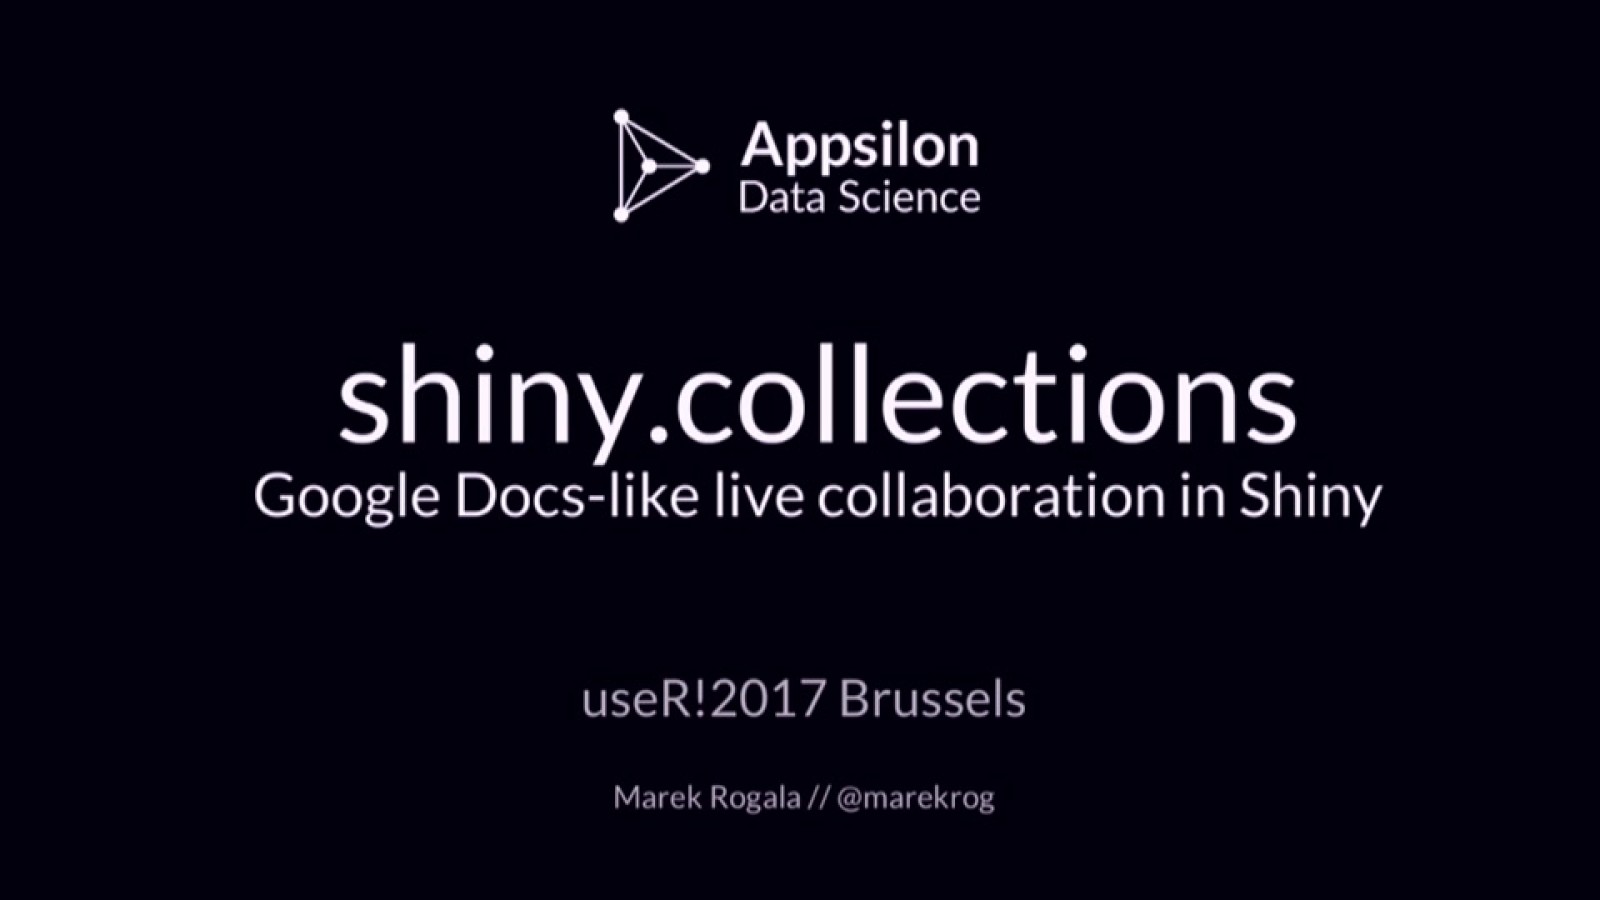 Shiny.collections: Google Docs-like live collaboration in Shiny